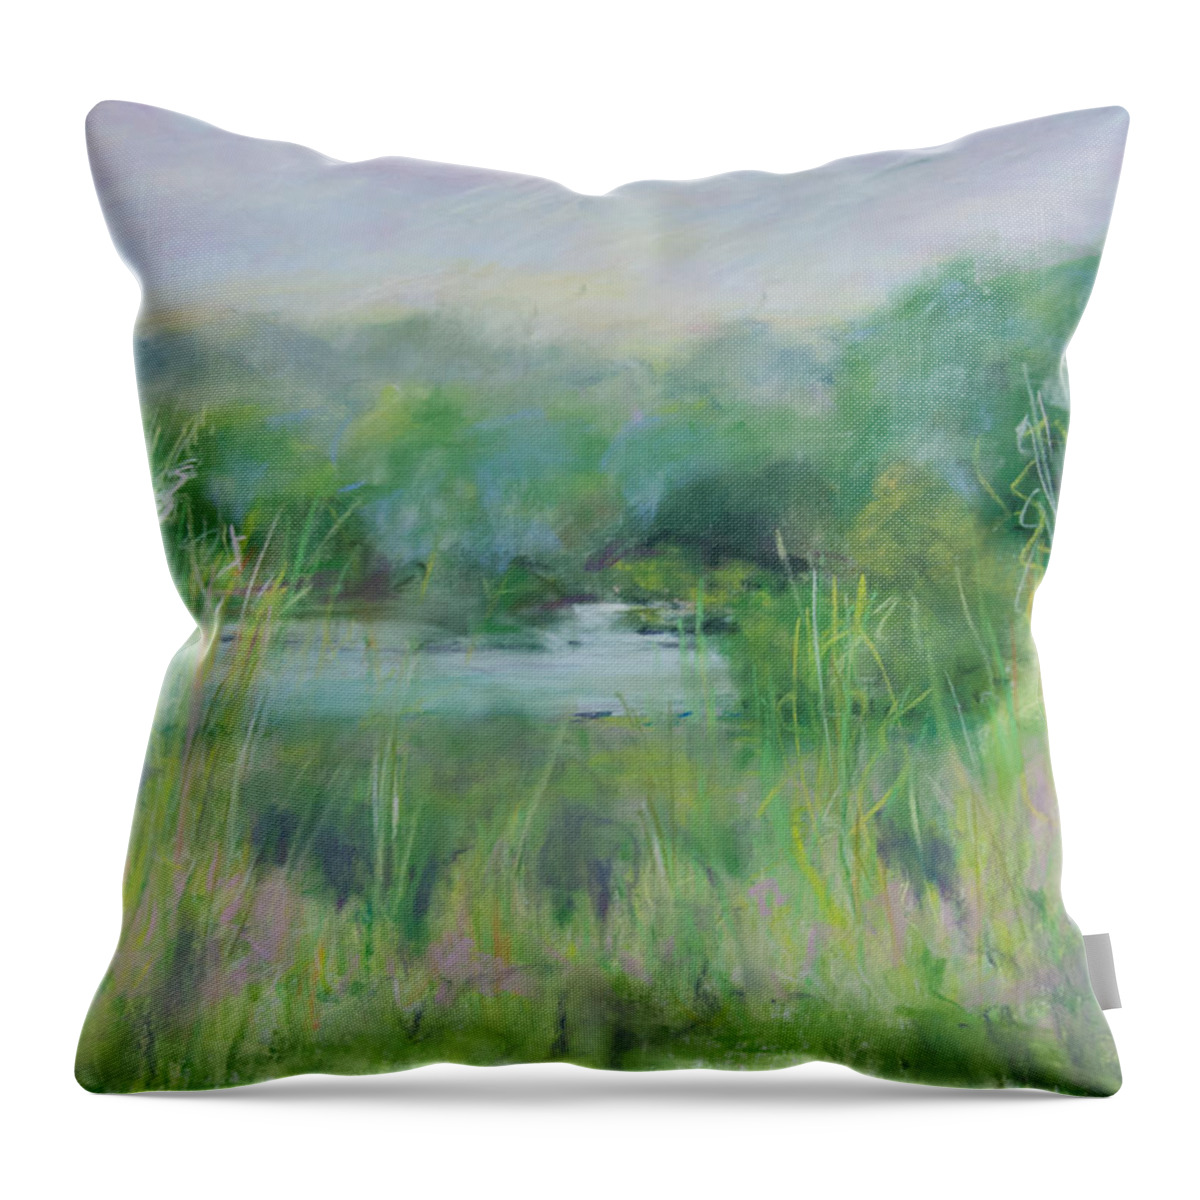 Landscapes Throw Pillow featuring the painting Lake Isaac Impressions by Lee Beuther